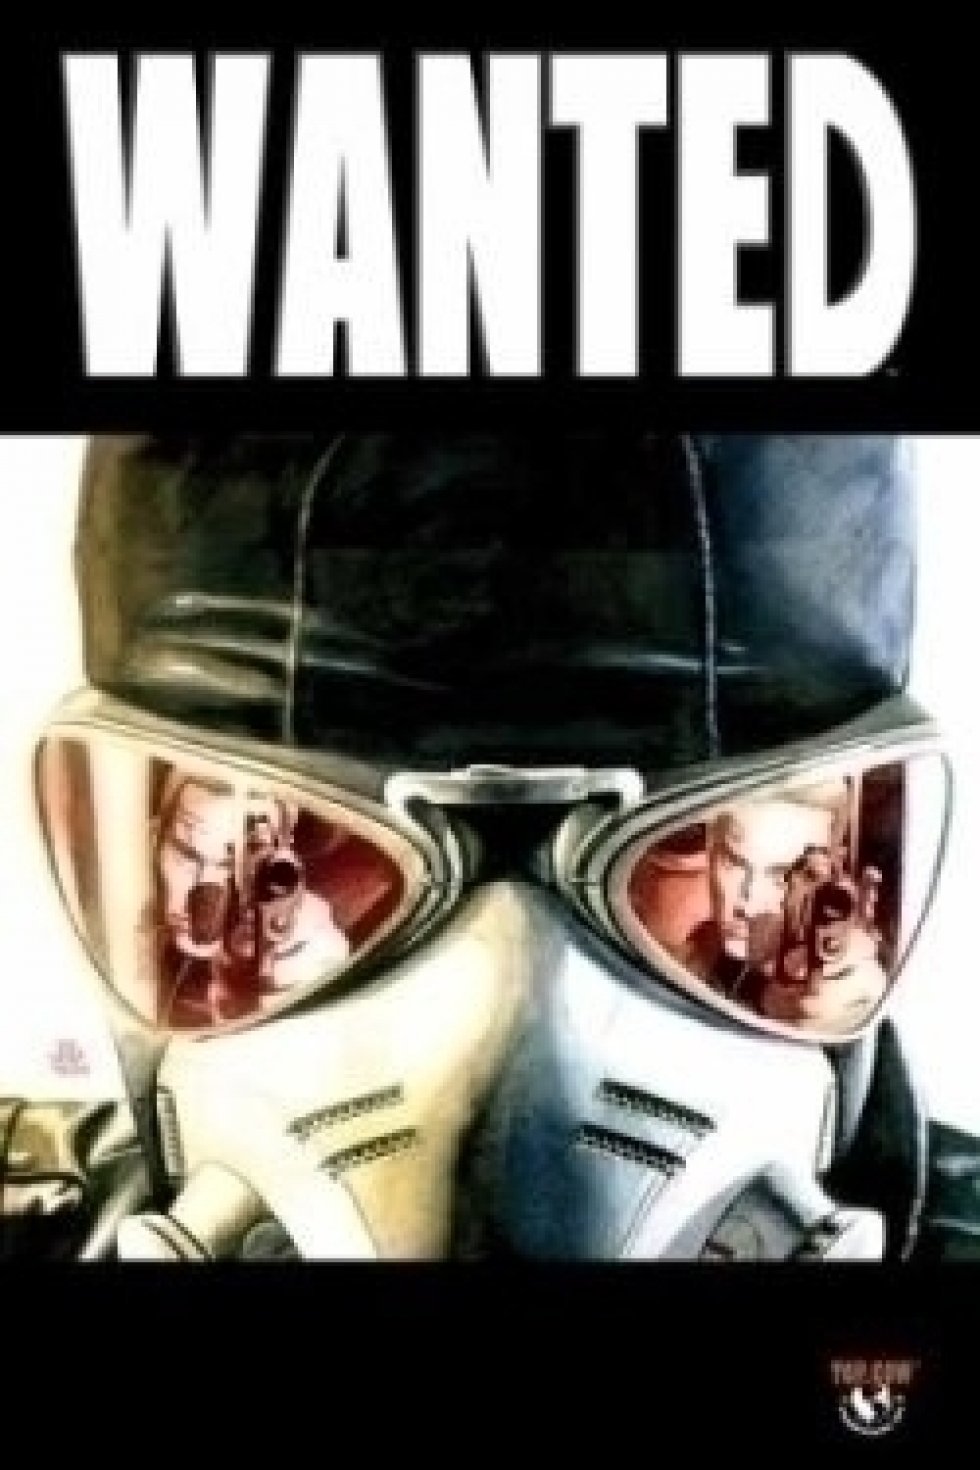 Wanted - tegneserien